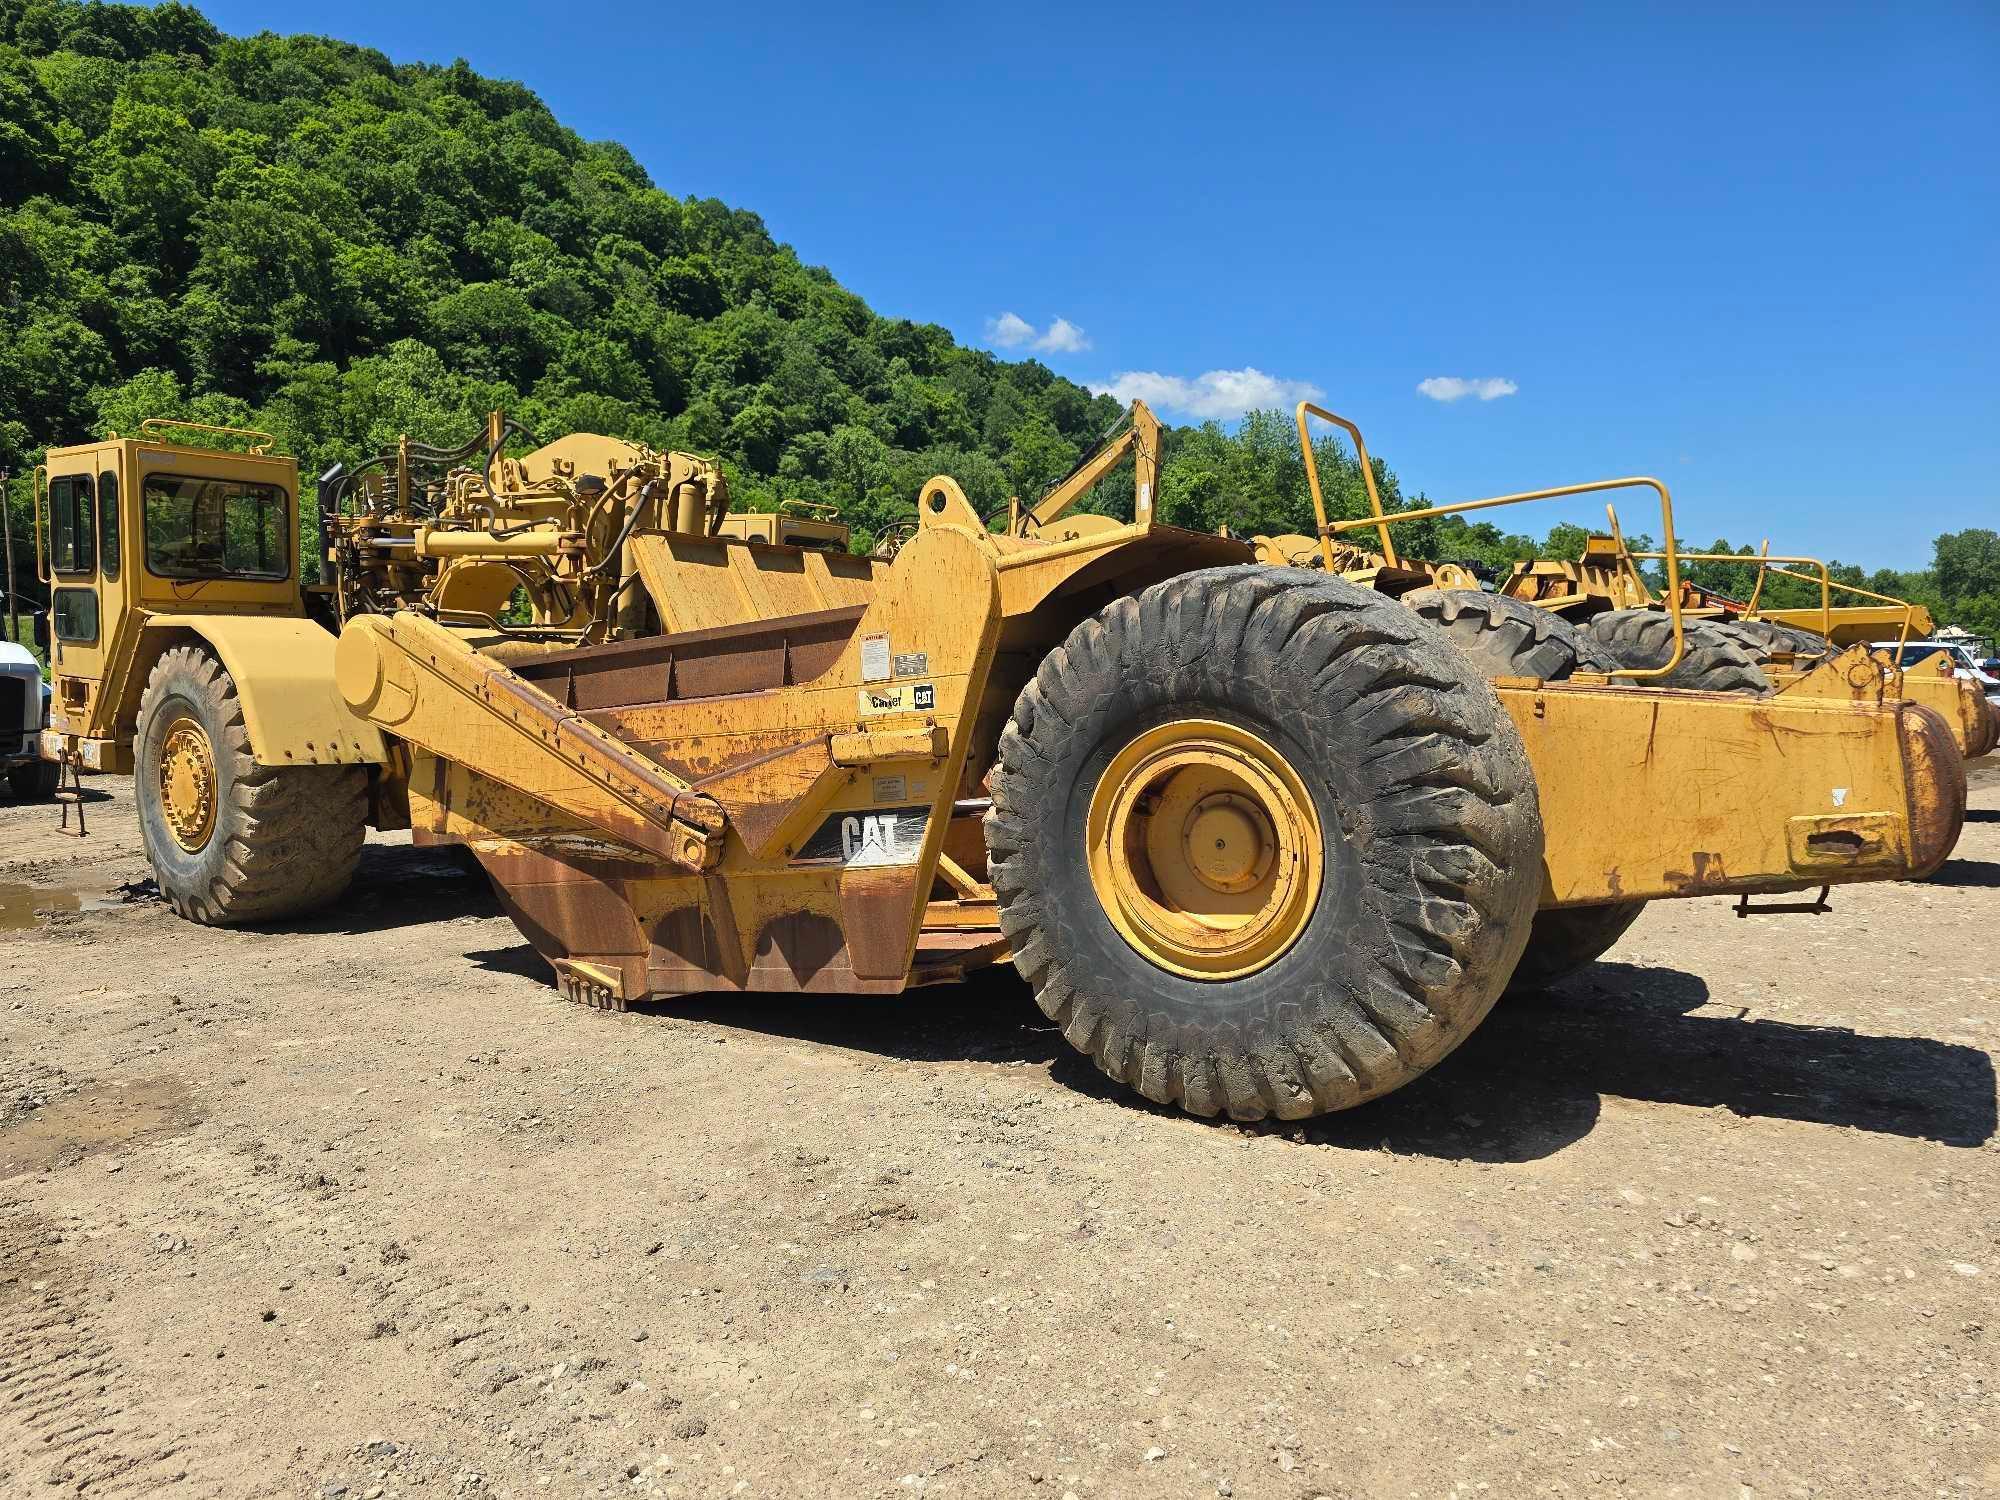 CAT 621F MOTOR SCRAPER SN:4SK00601 powered by Cat 3406 diesel engine, equipped with EROPS, air,